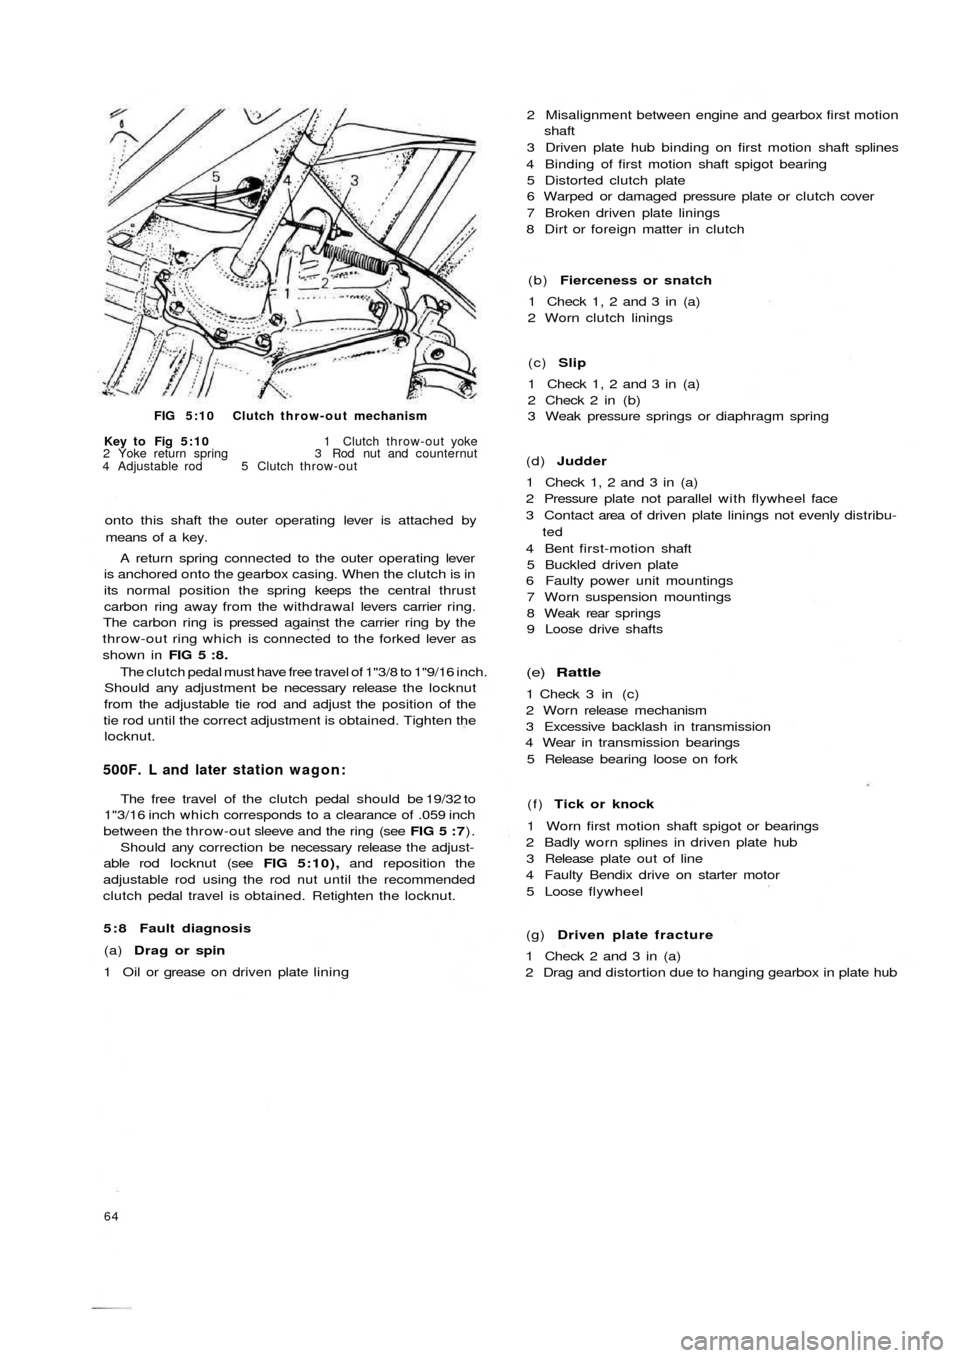 FIAT 500 1965 1.G Workshop Manual FIG 5:10 Clutch throw-out mechanism
Key to  Fig  5:10 1 Clutch throw-out yoke
2 Yoke return spring 3 Rod nut and counternut
4 Adjustable rod  5  Clutch throw-out
onto this shaft the outer operating le